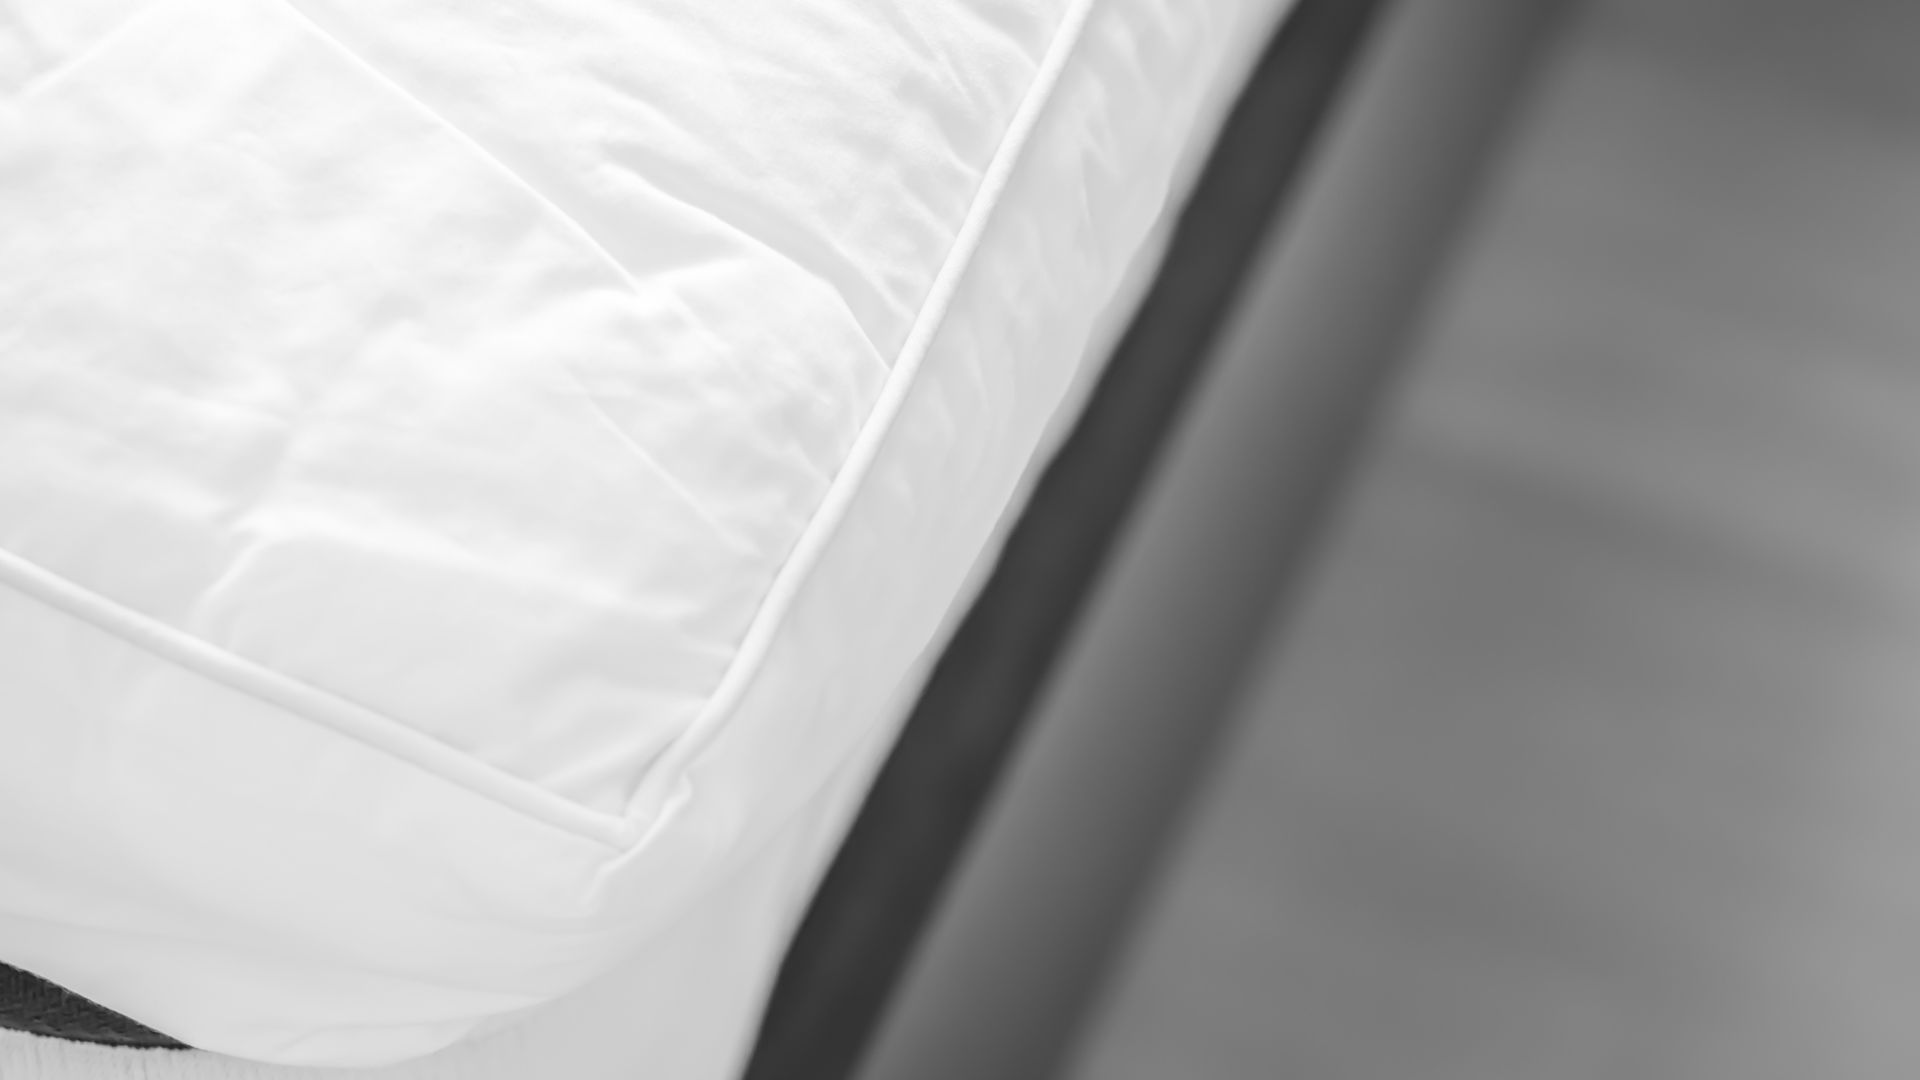 Image shows the corner of a mattress topper placed on a grey mattress